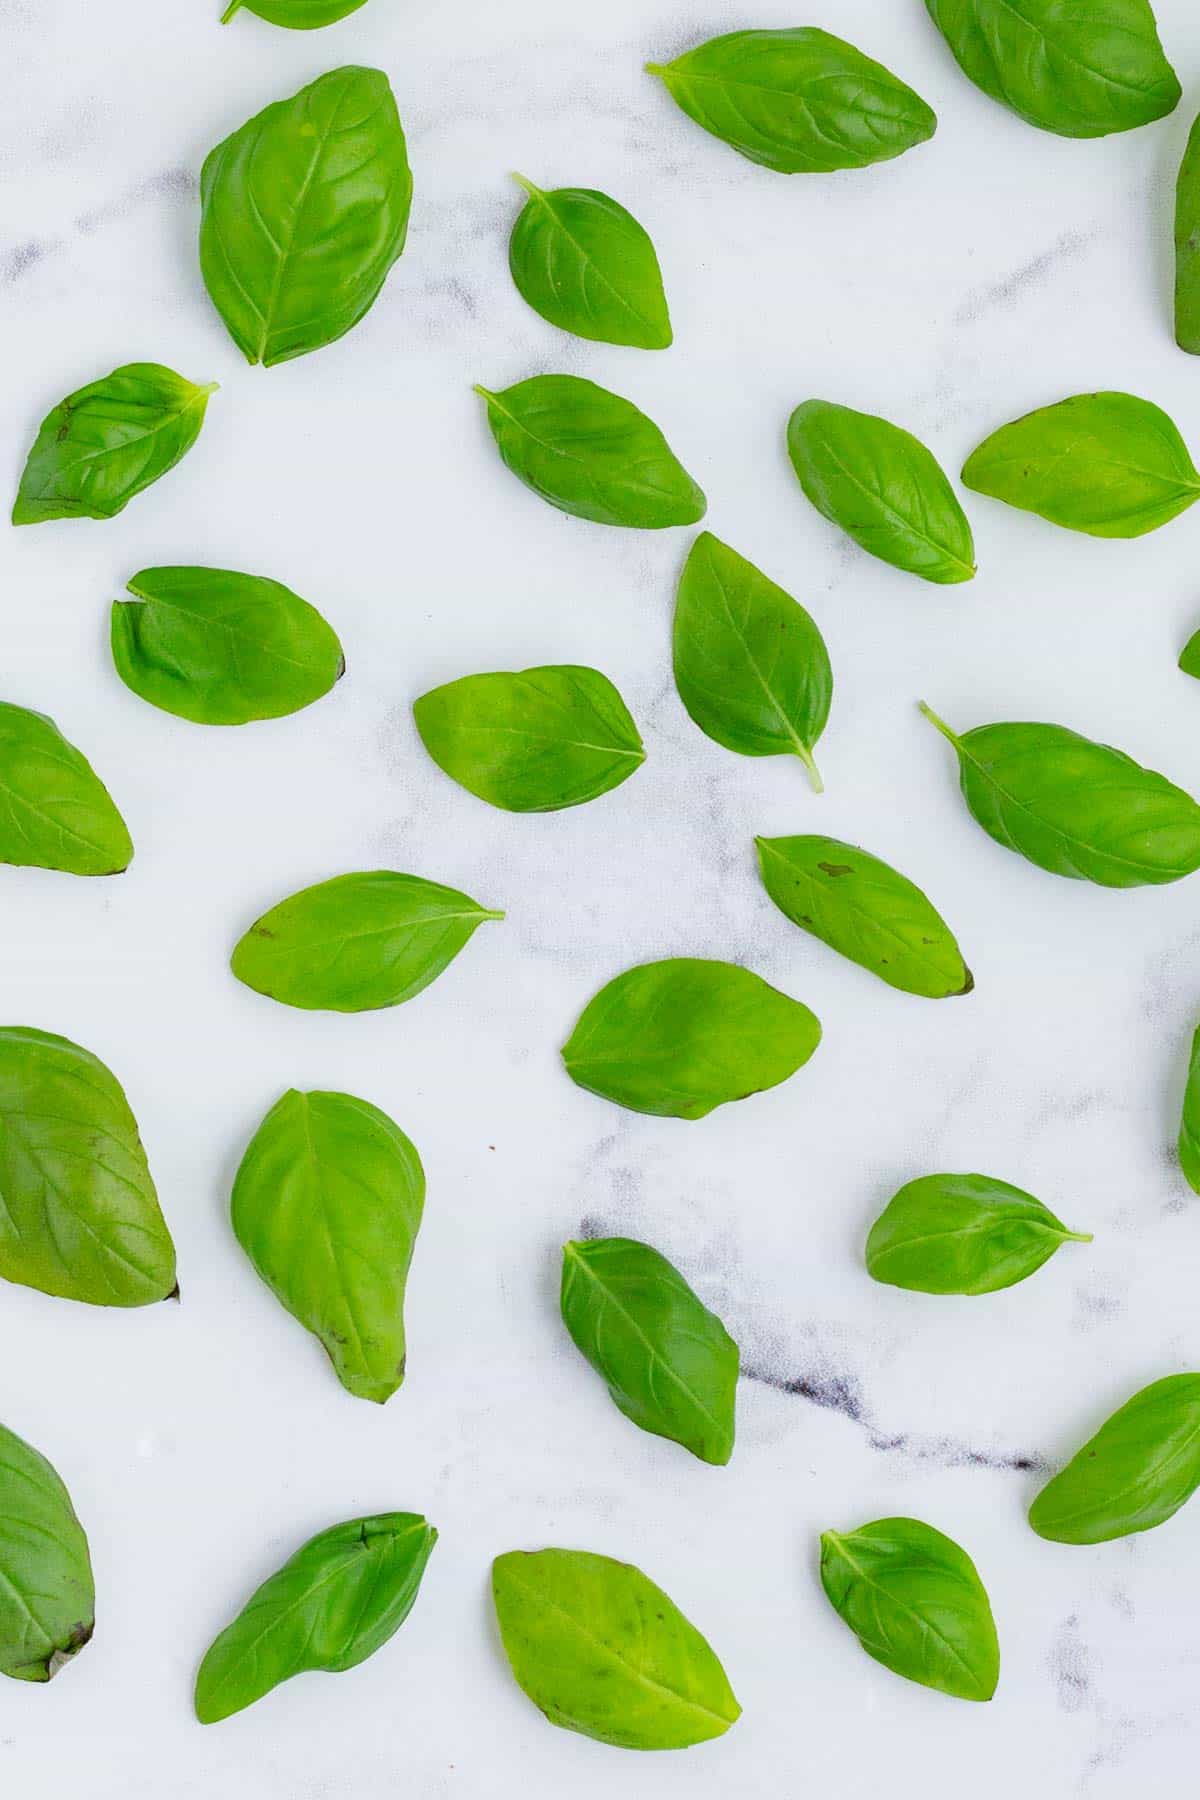 You can easily air dry basil leaves on the counter.